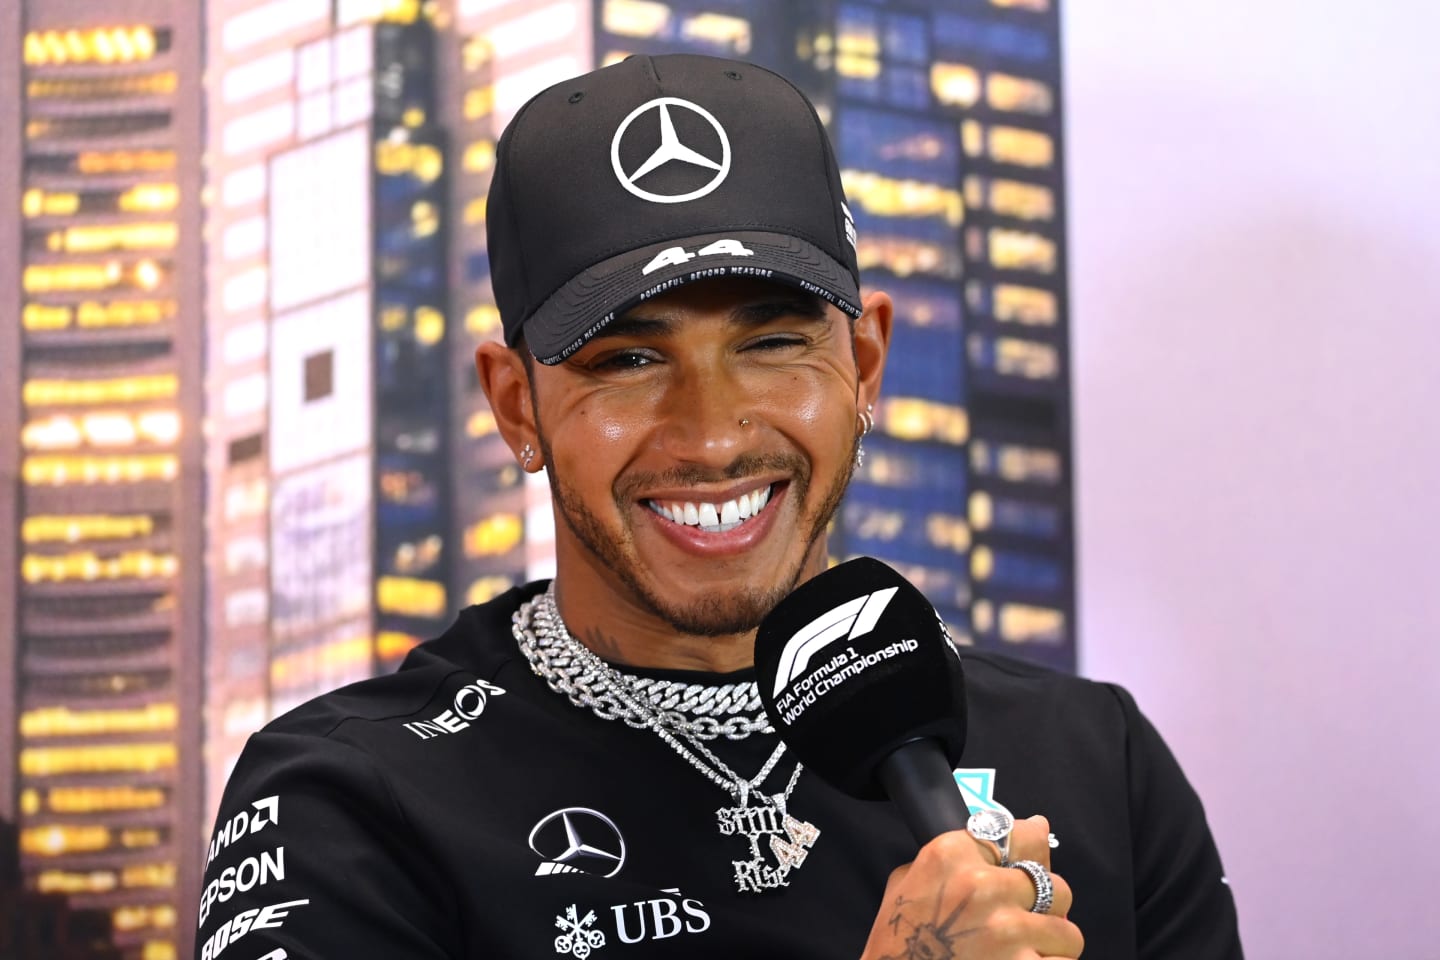 MELBOURNE, AUSTRALIA - MARCH 12: Lewis Hamilton of Great Britain and Mercedes GP reacts during a